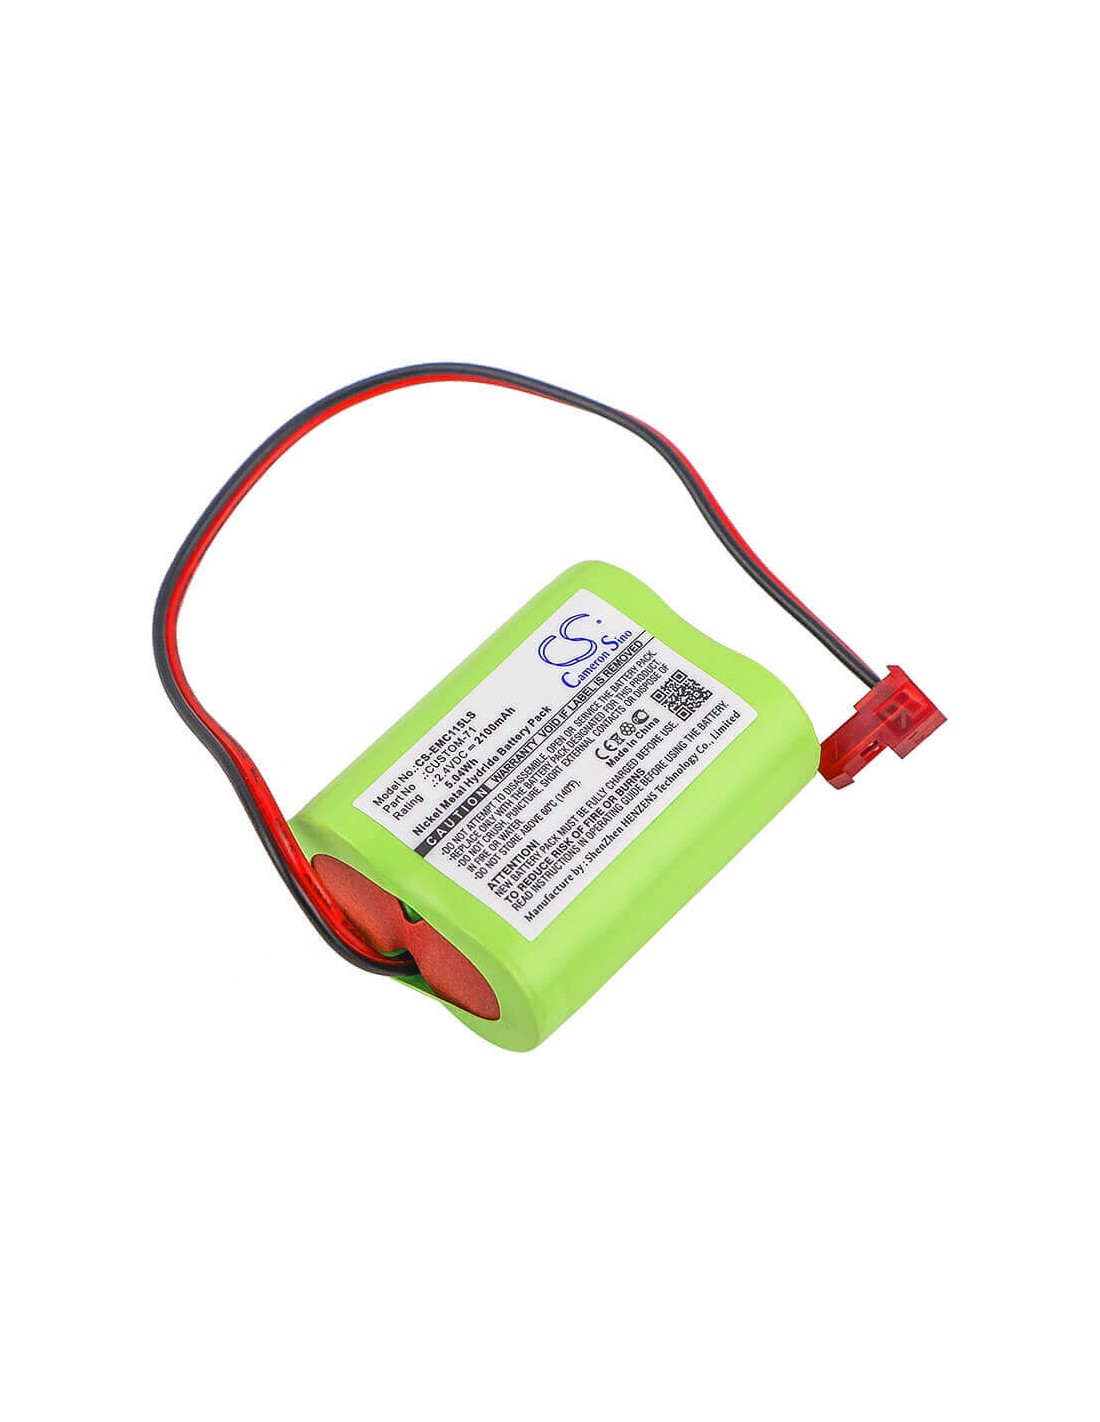 Battery for Interstate, Nic1158, Lithonia, Elb2p401n, Powercell 2.4V, 2100mAh - 5.04Wh